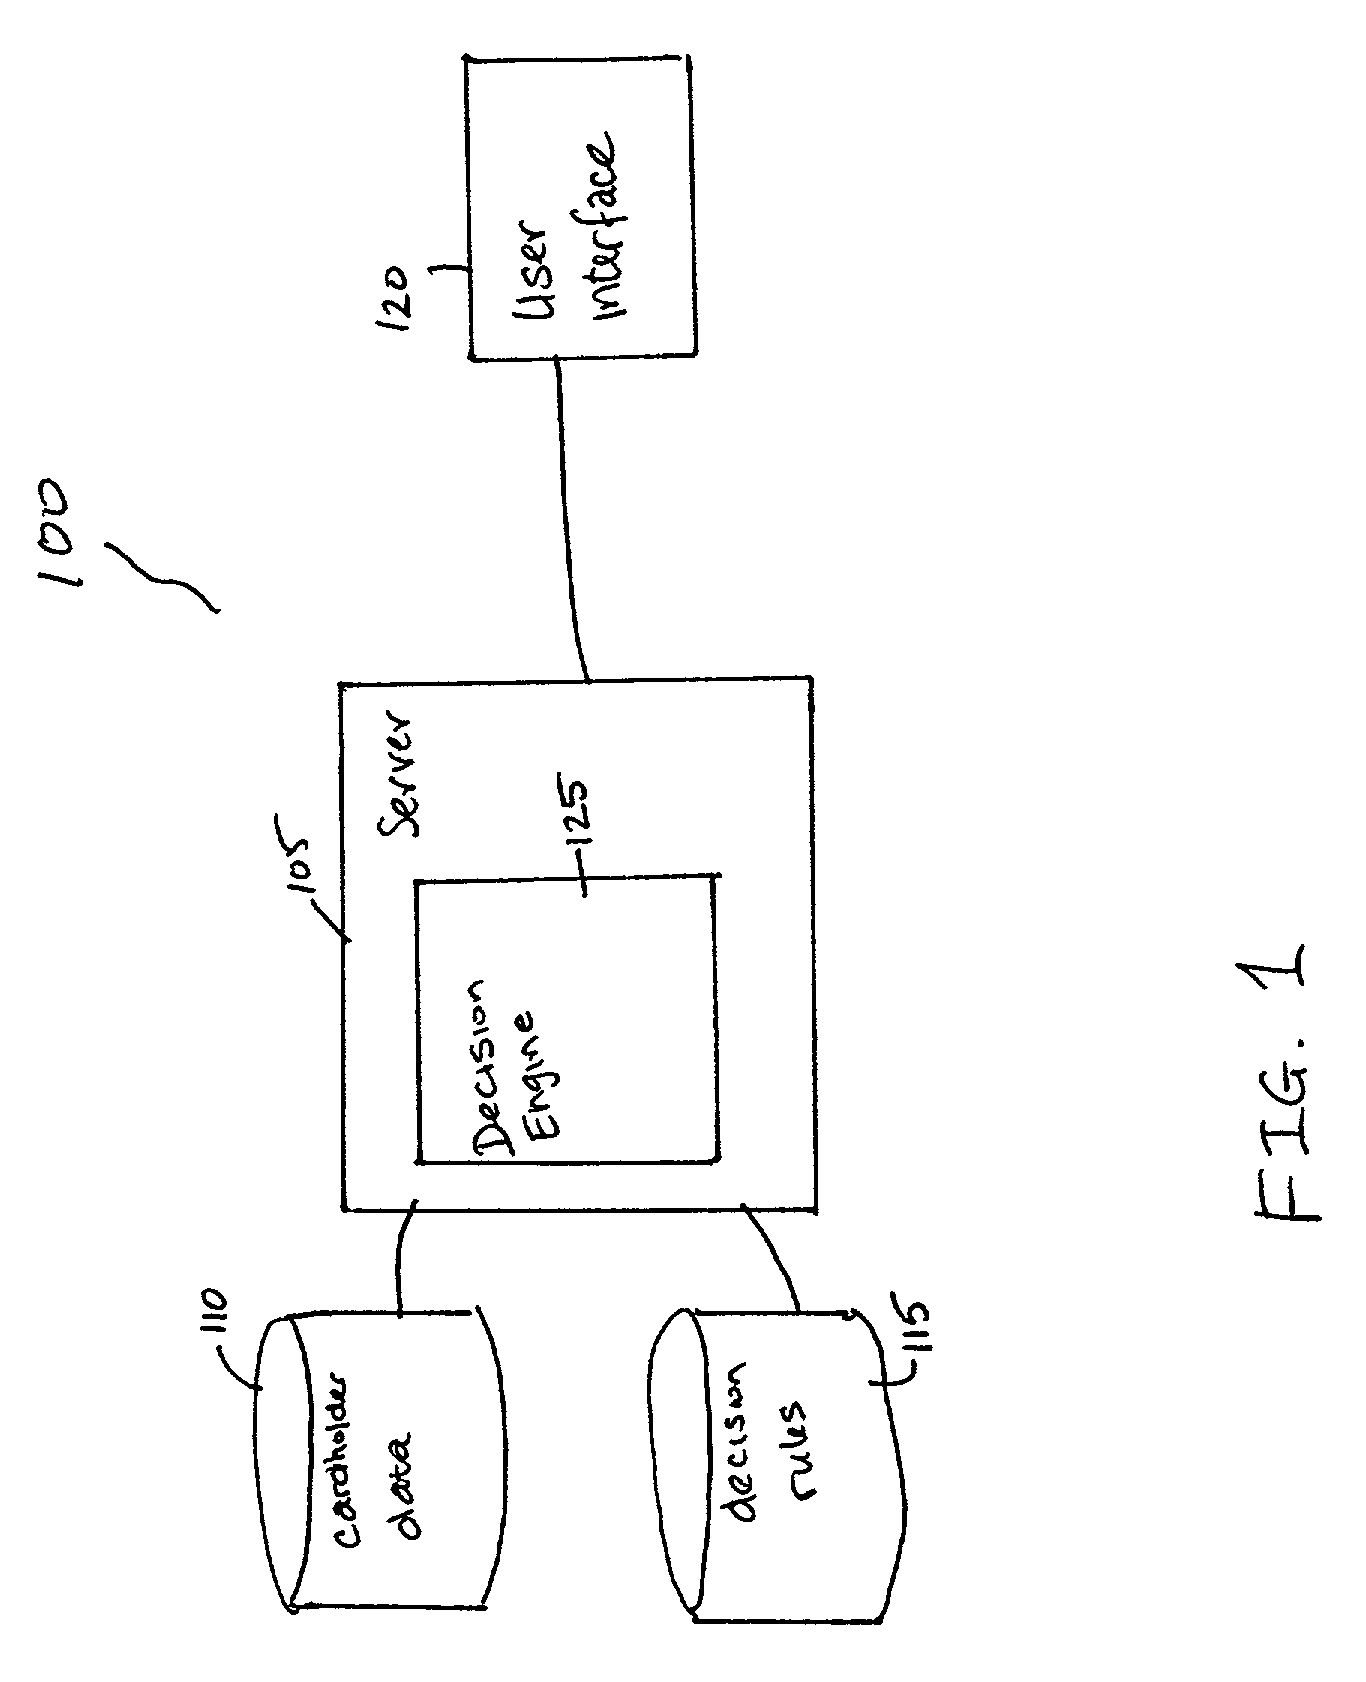 Method and systems for handling method level processing in connection with account pricing